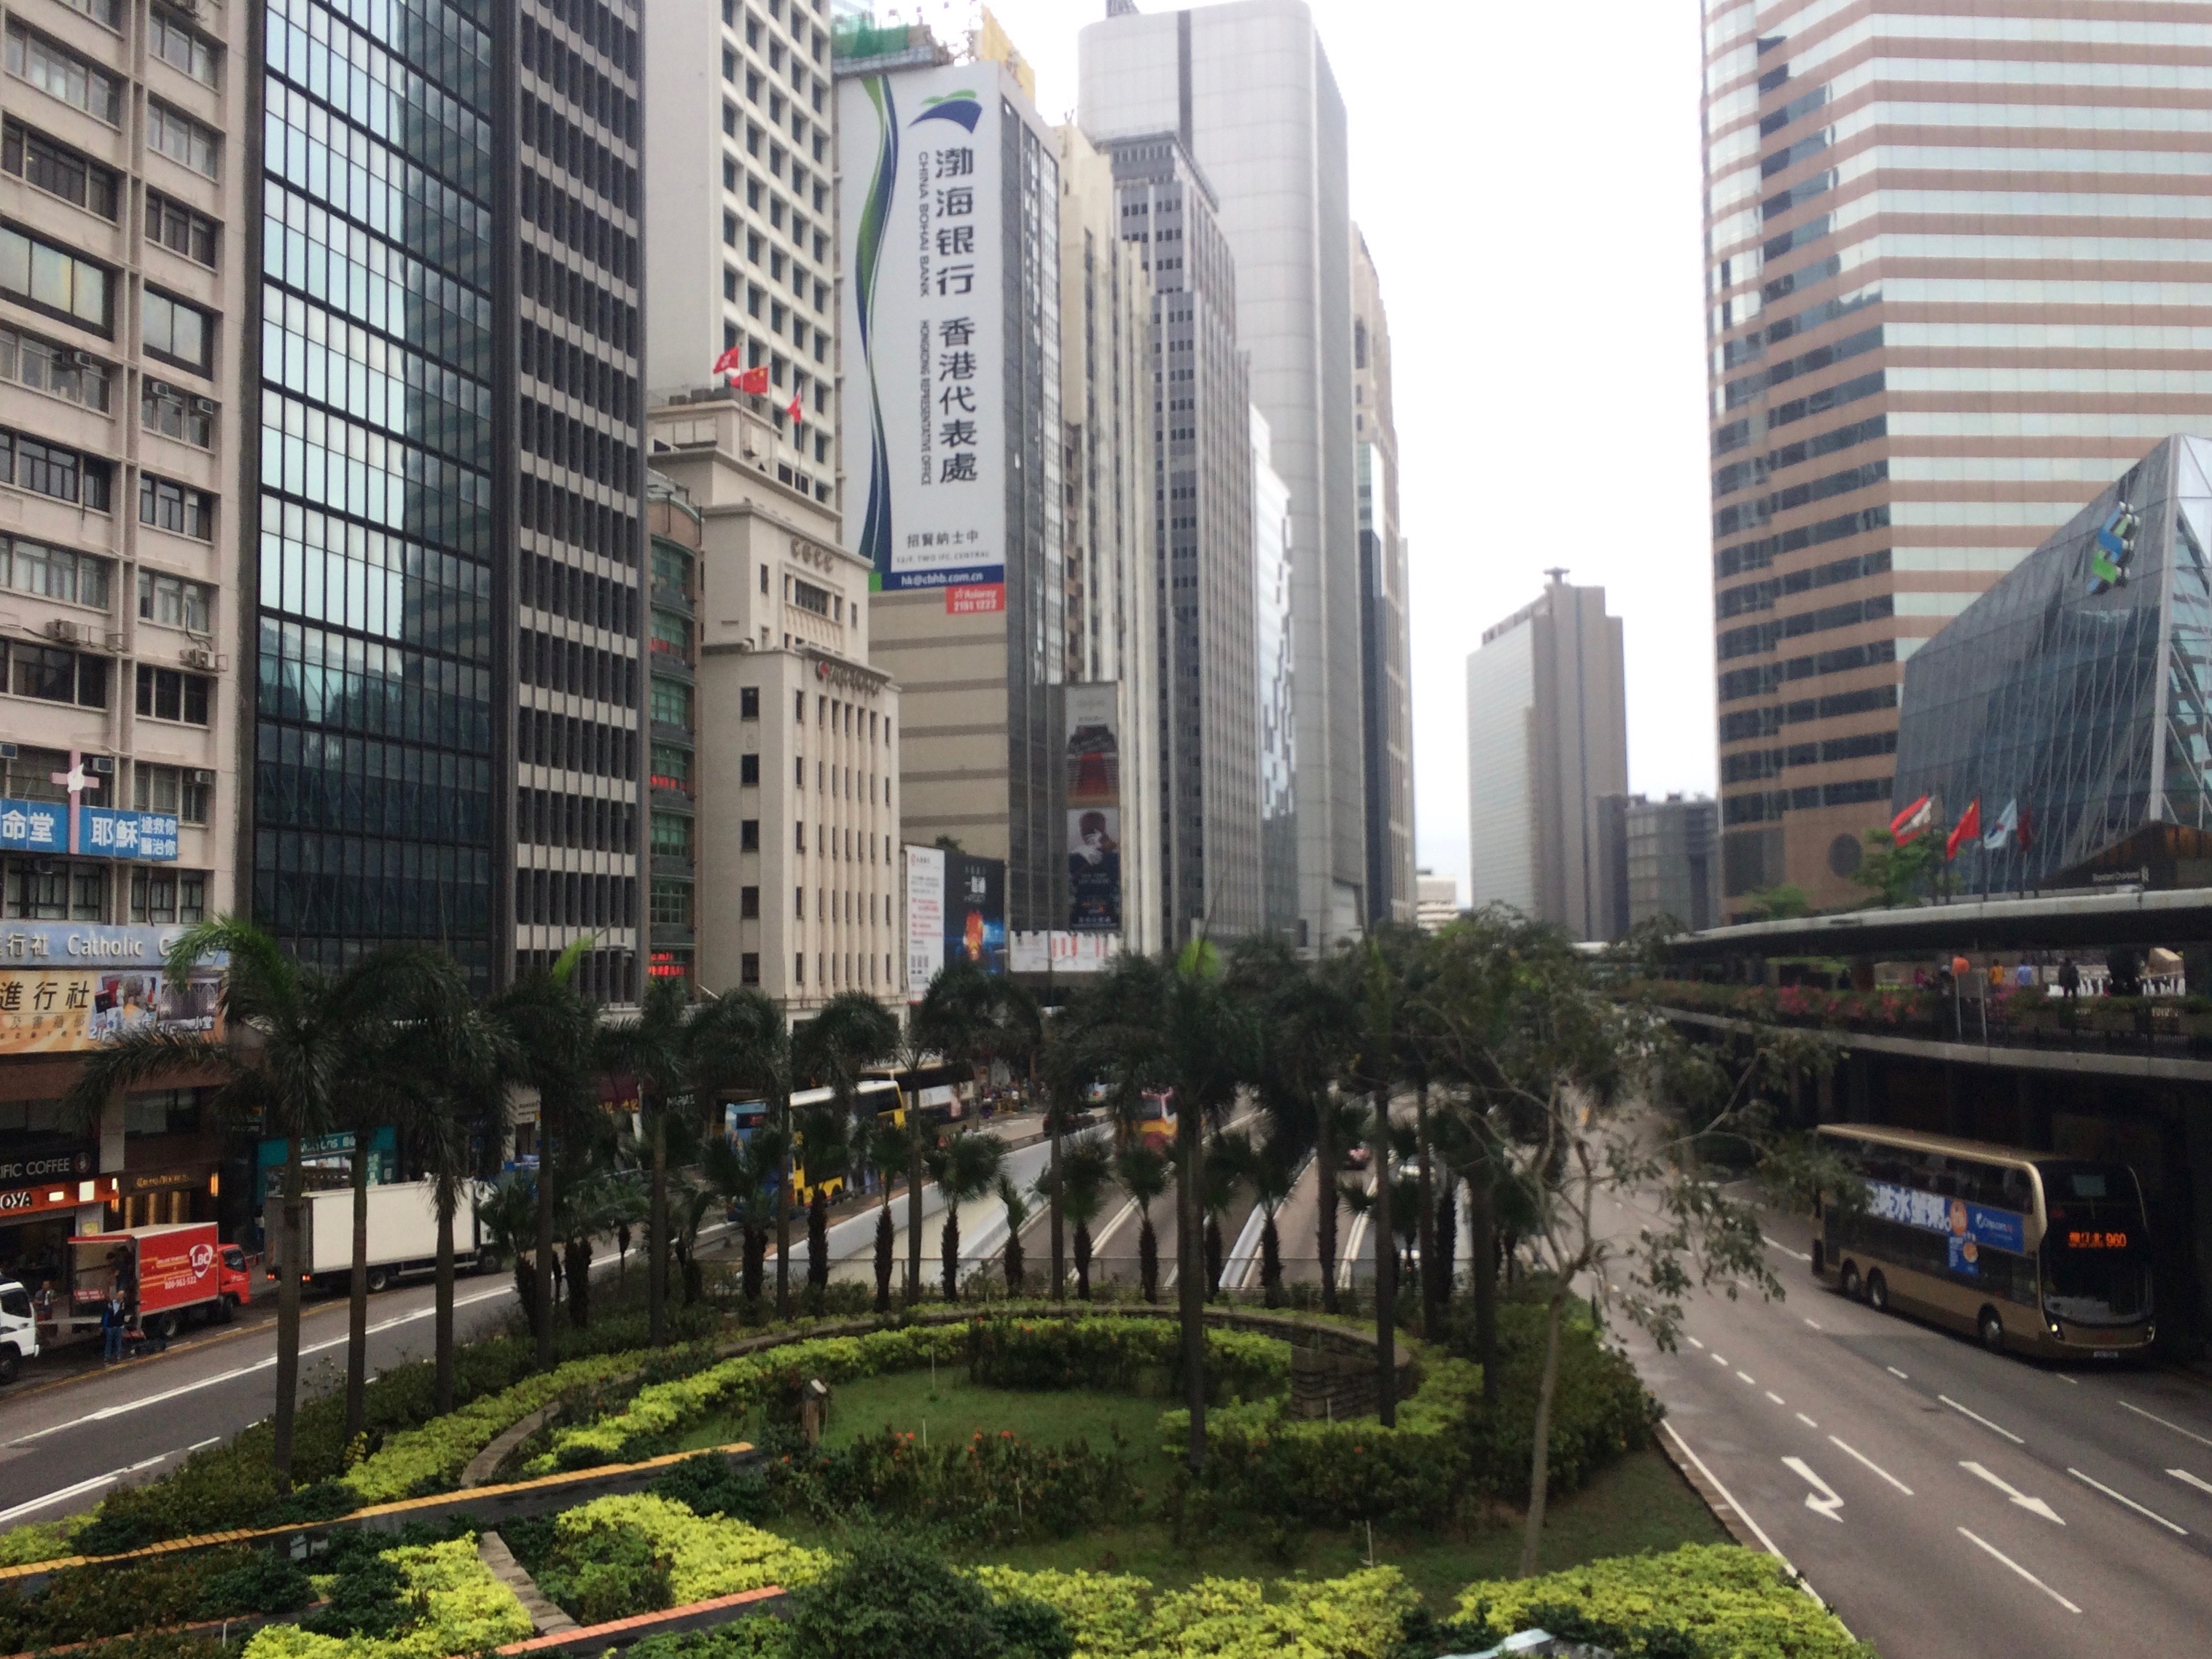 View of the Hong Kong. Tall buildings and streets